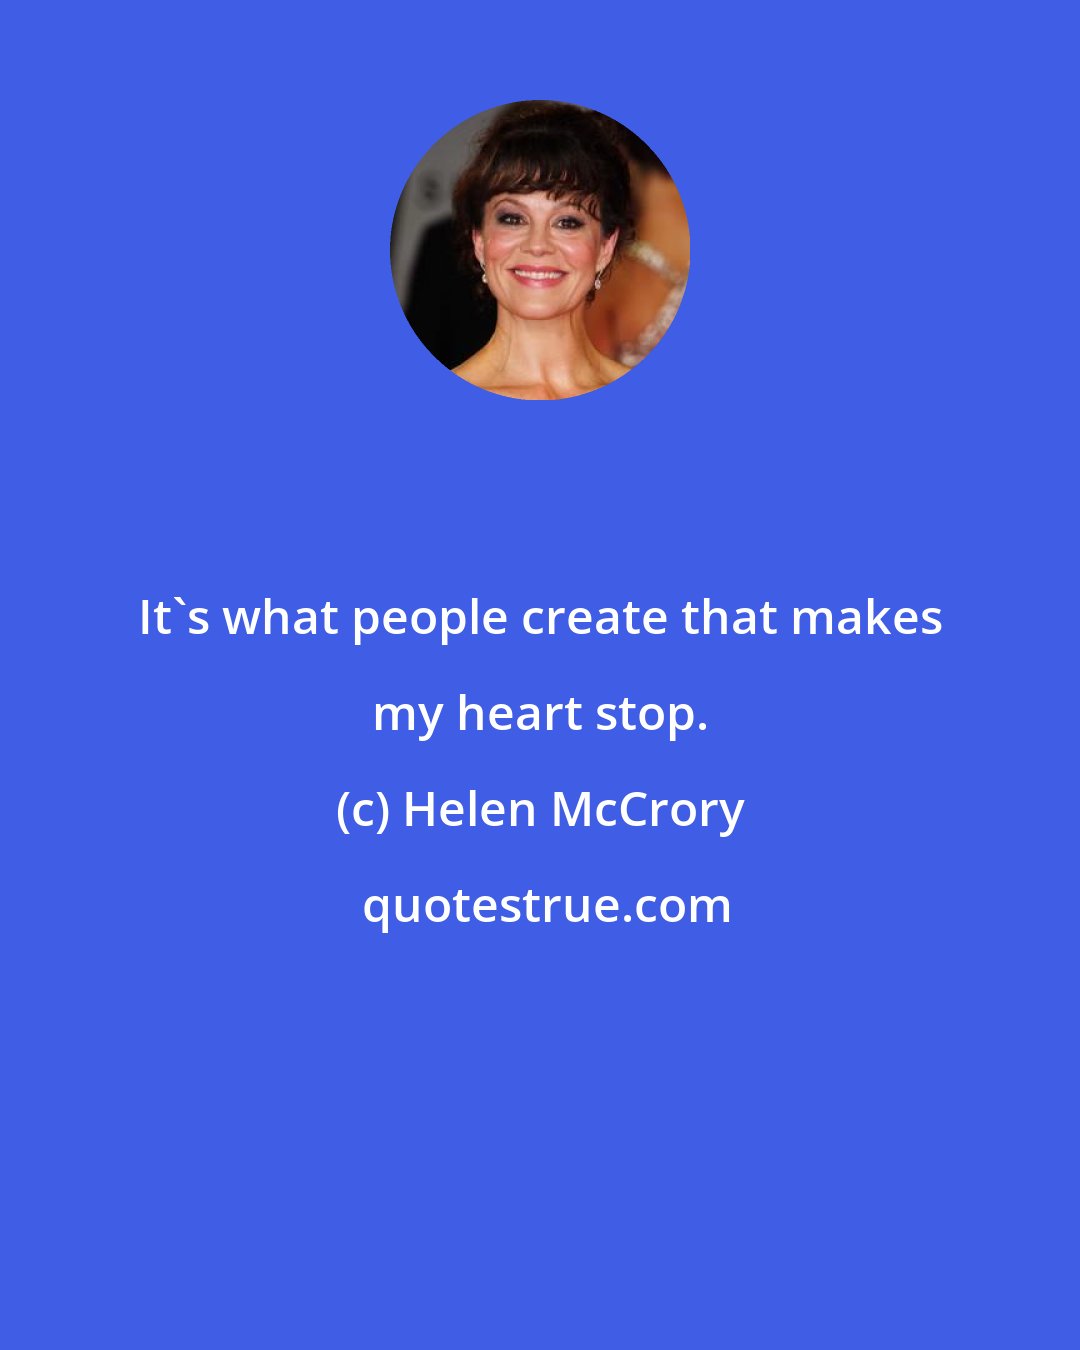 Helen McCrory: It's what people create that makes my heart stop.